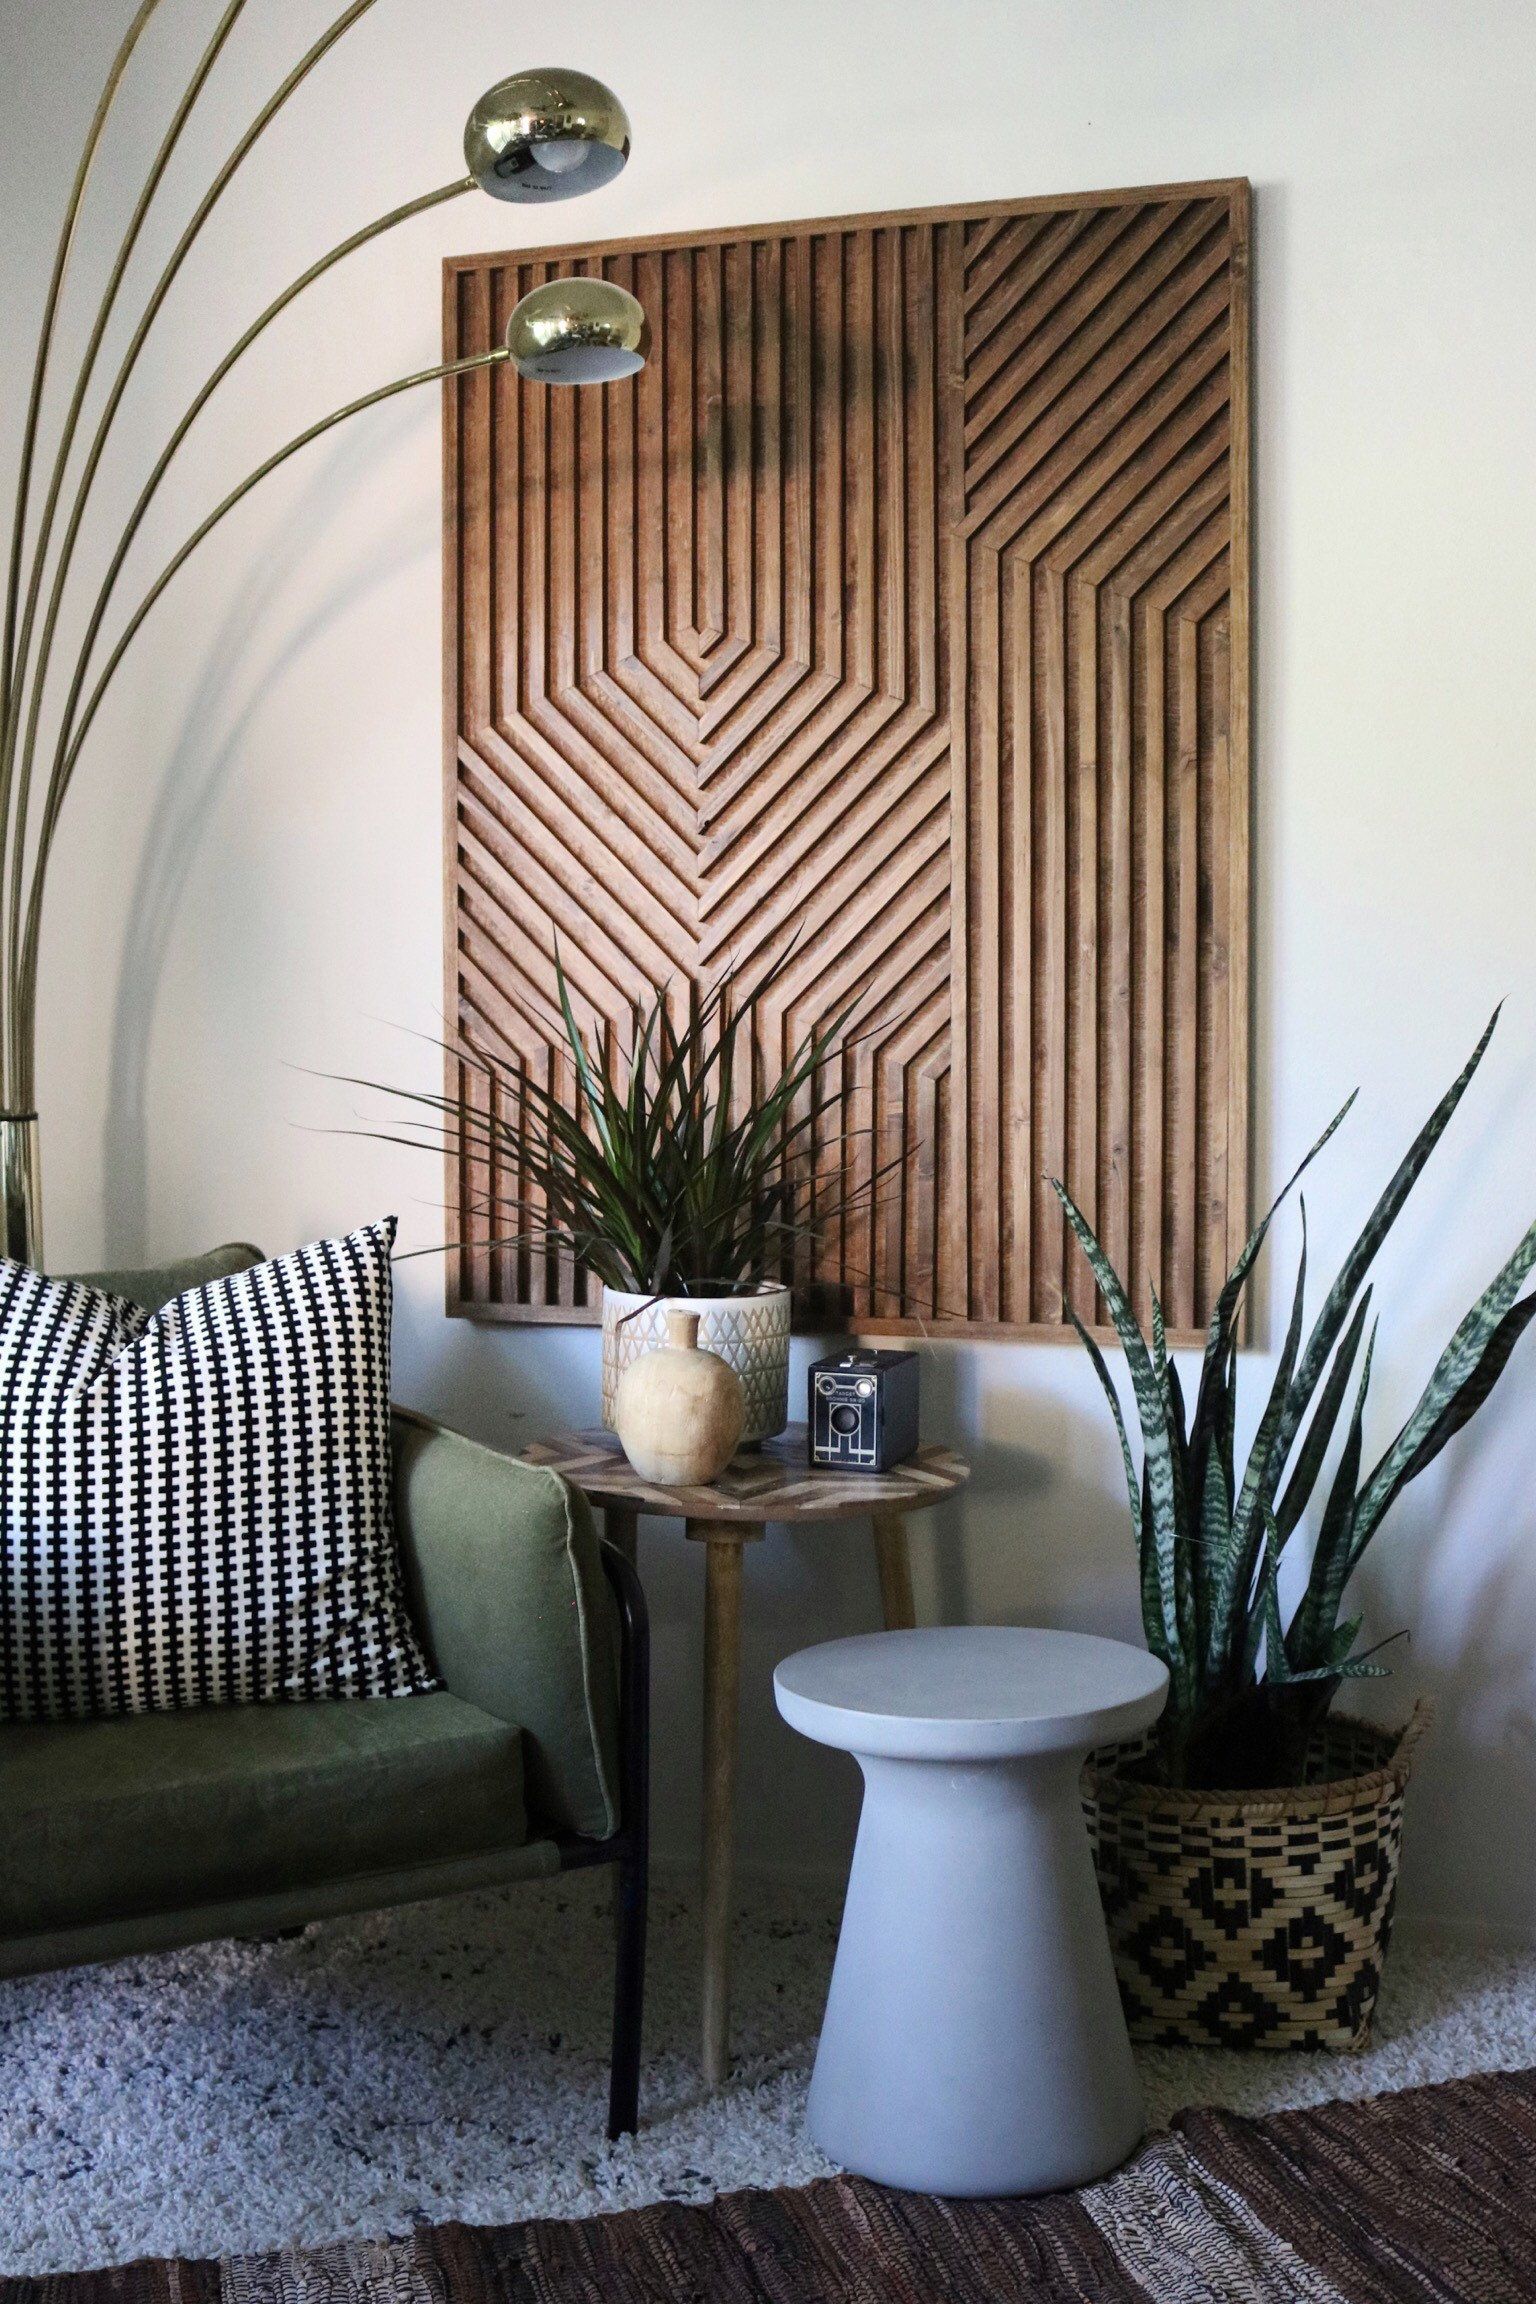 Geometric Wood Art, Geometric Wall Art, Wood Wall Art With Regard To Most Recently Released Abstract Flow Wood Wall Art (View 2 of 20)